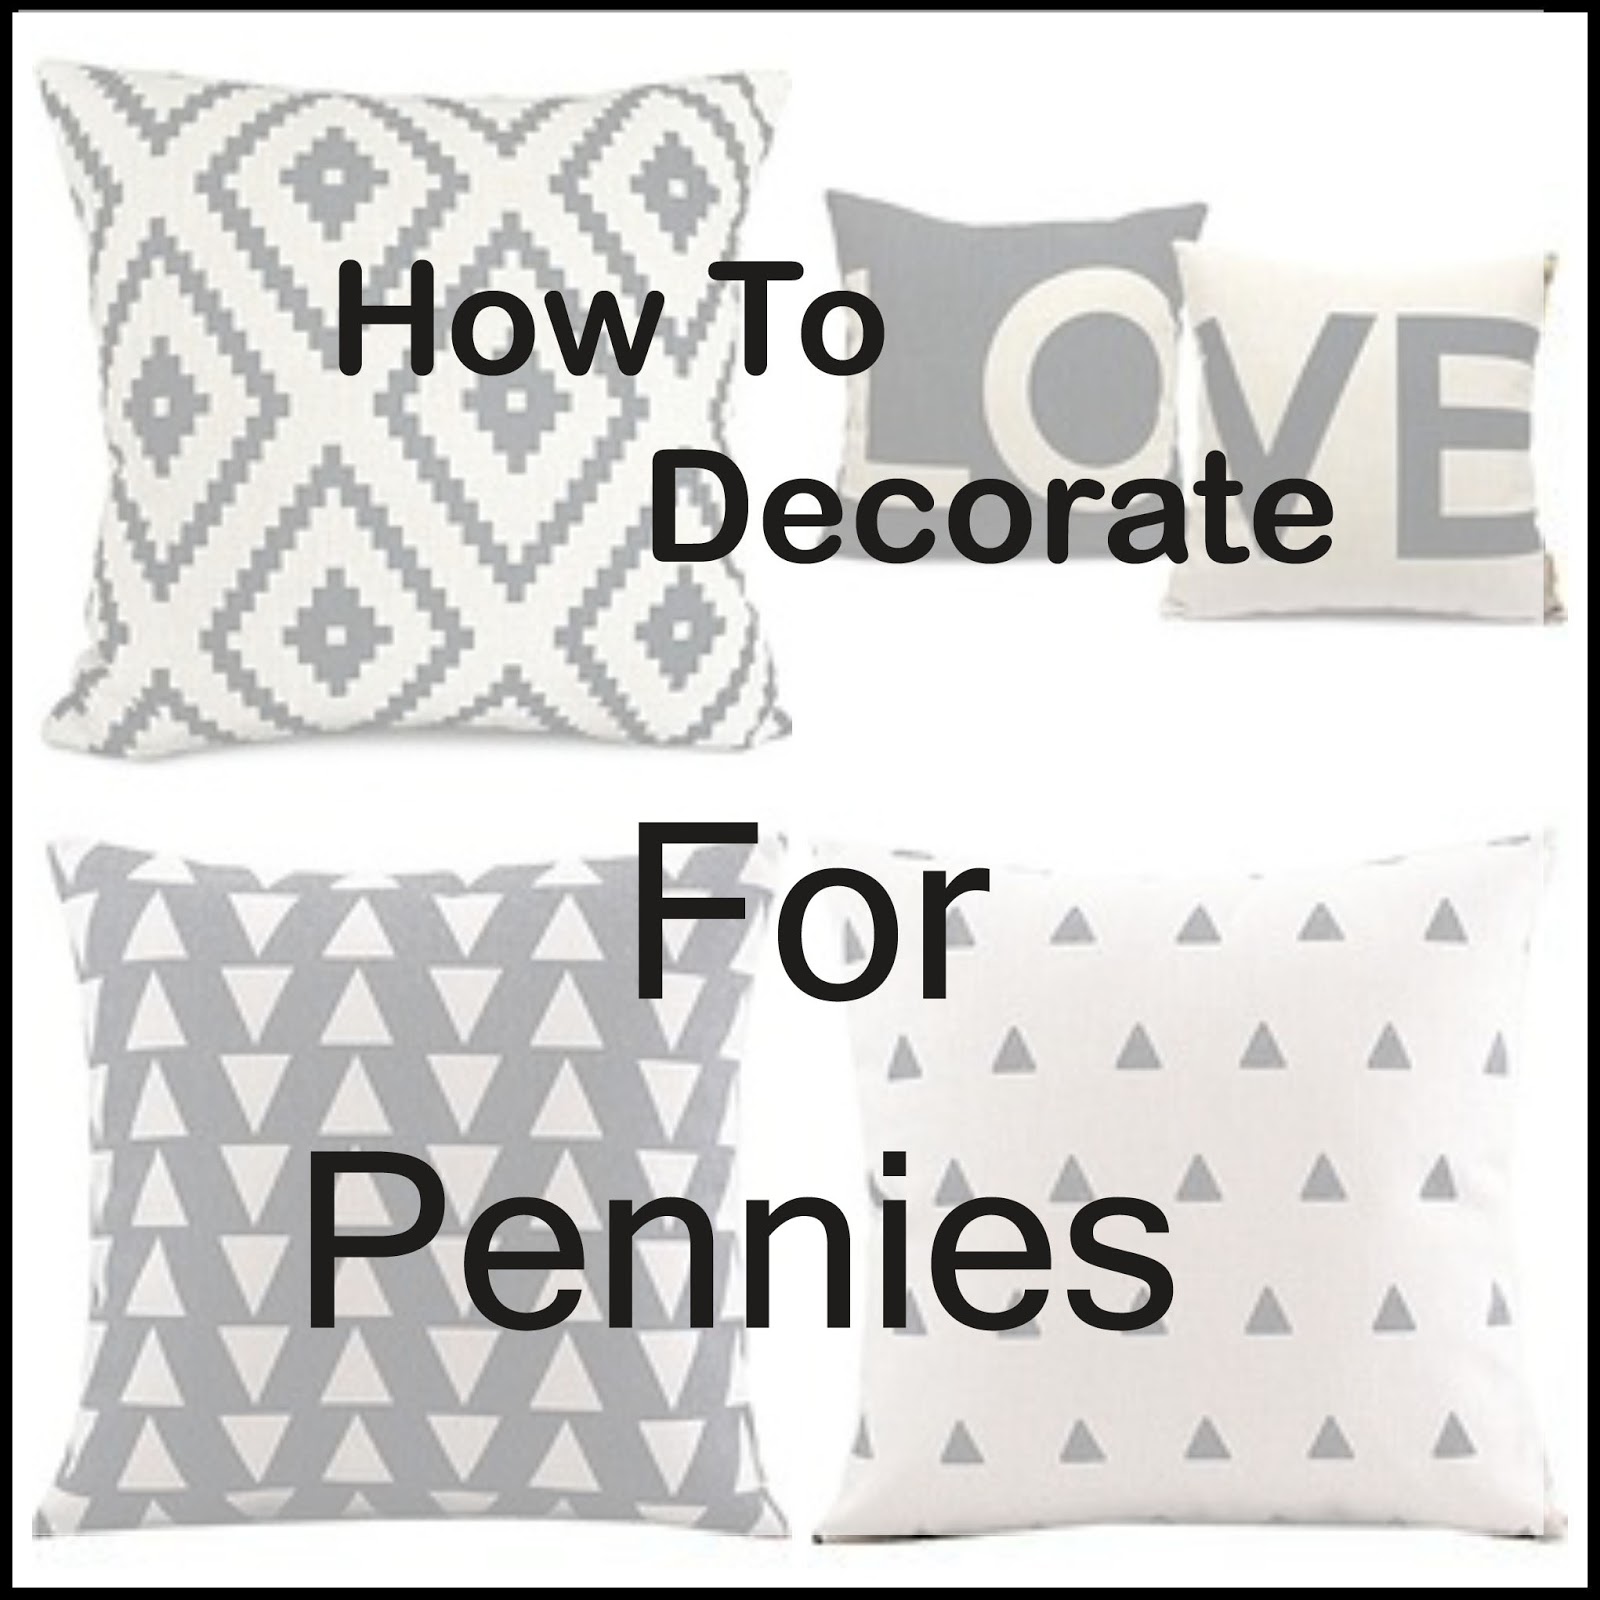 How To Decorate For Pennies - Totally Change A Room For Under $25